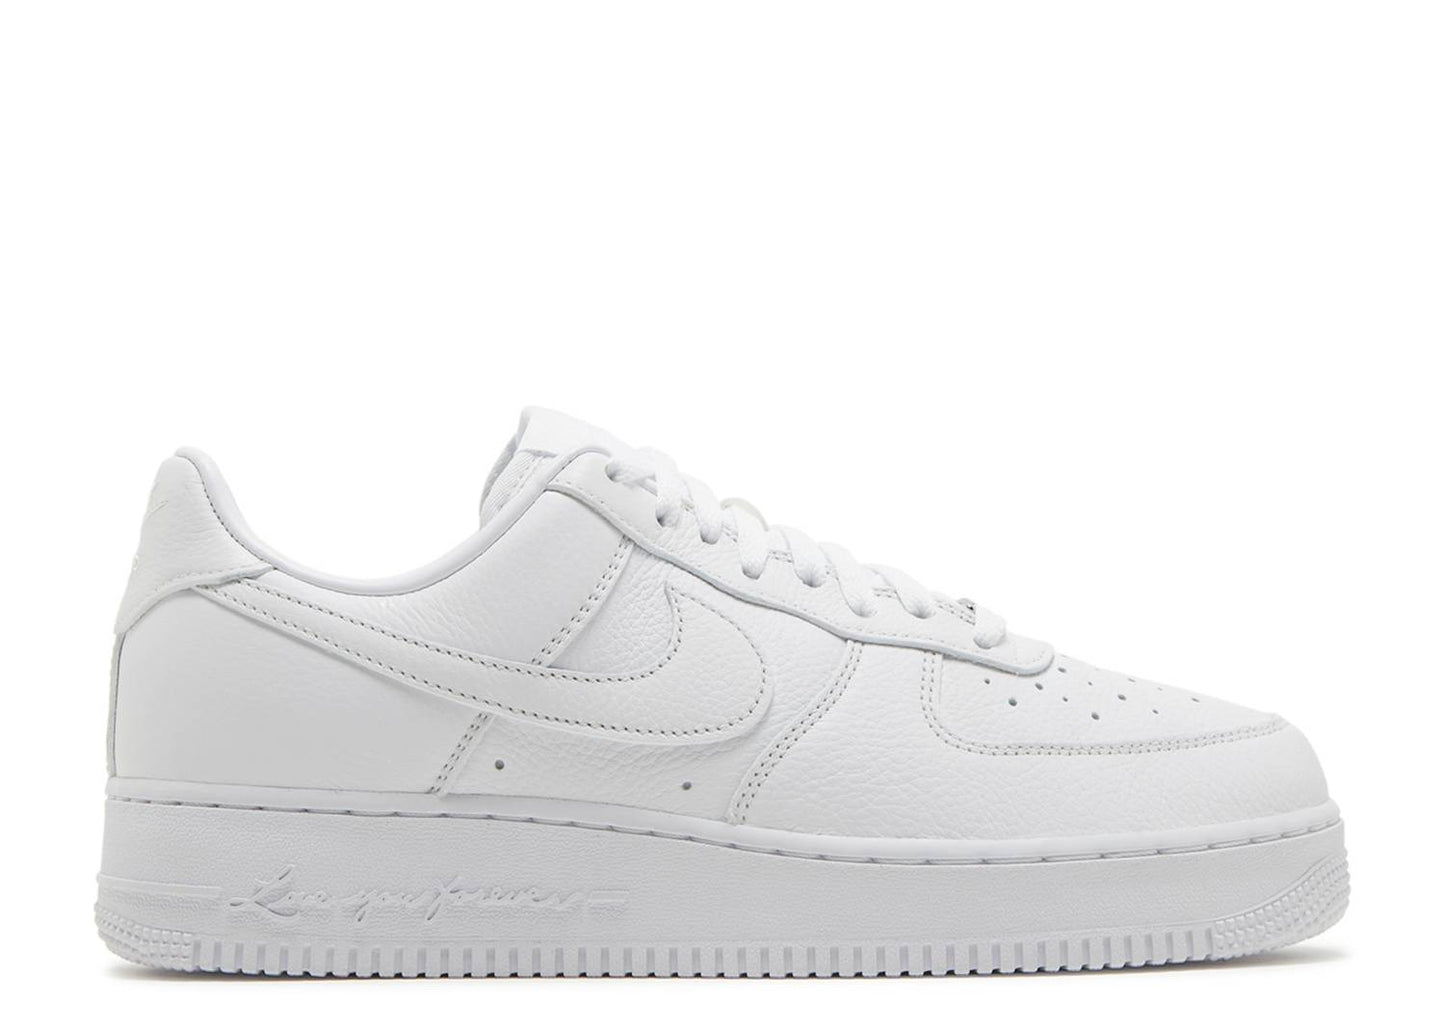 Nike Air Force 1 Low "CLB"